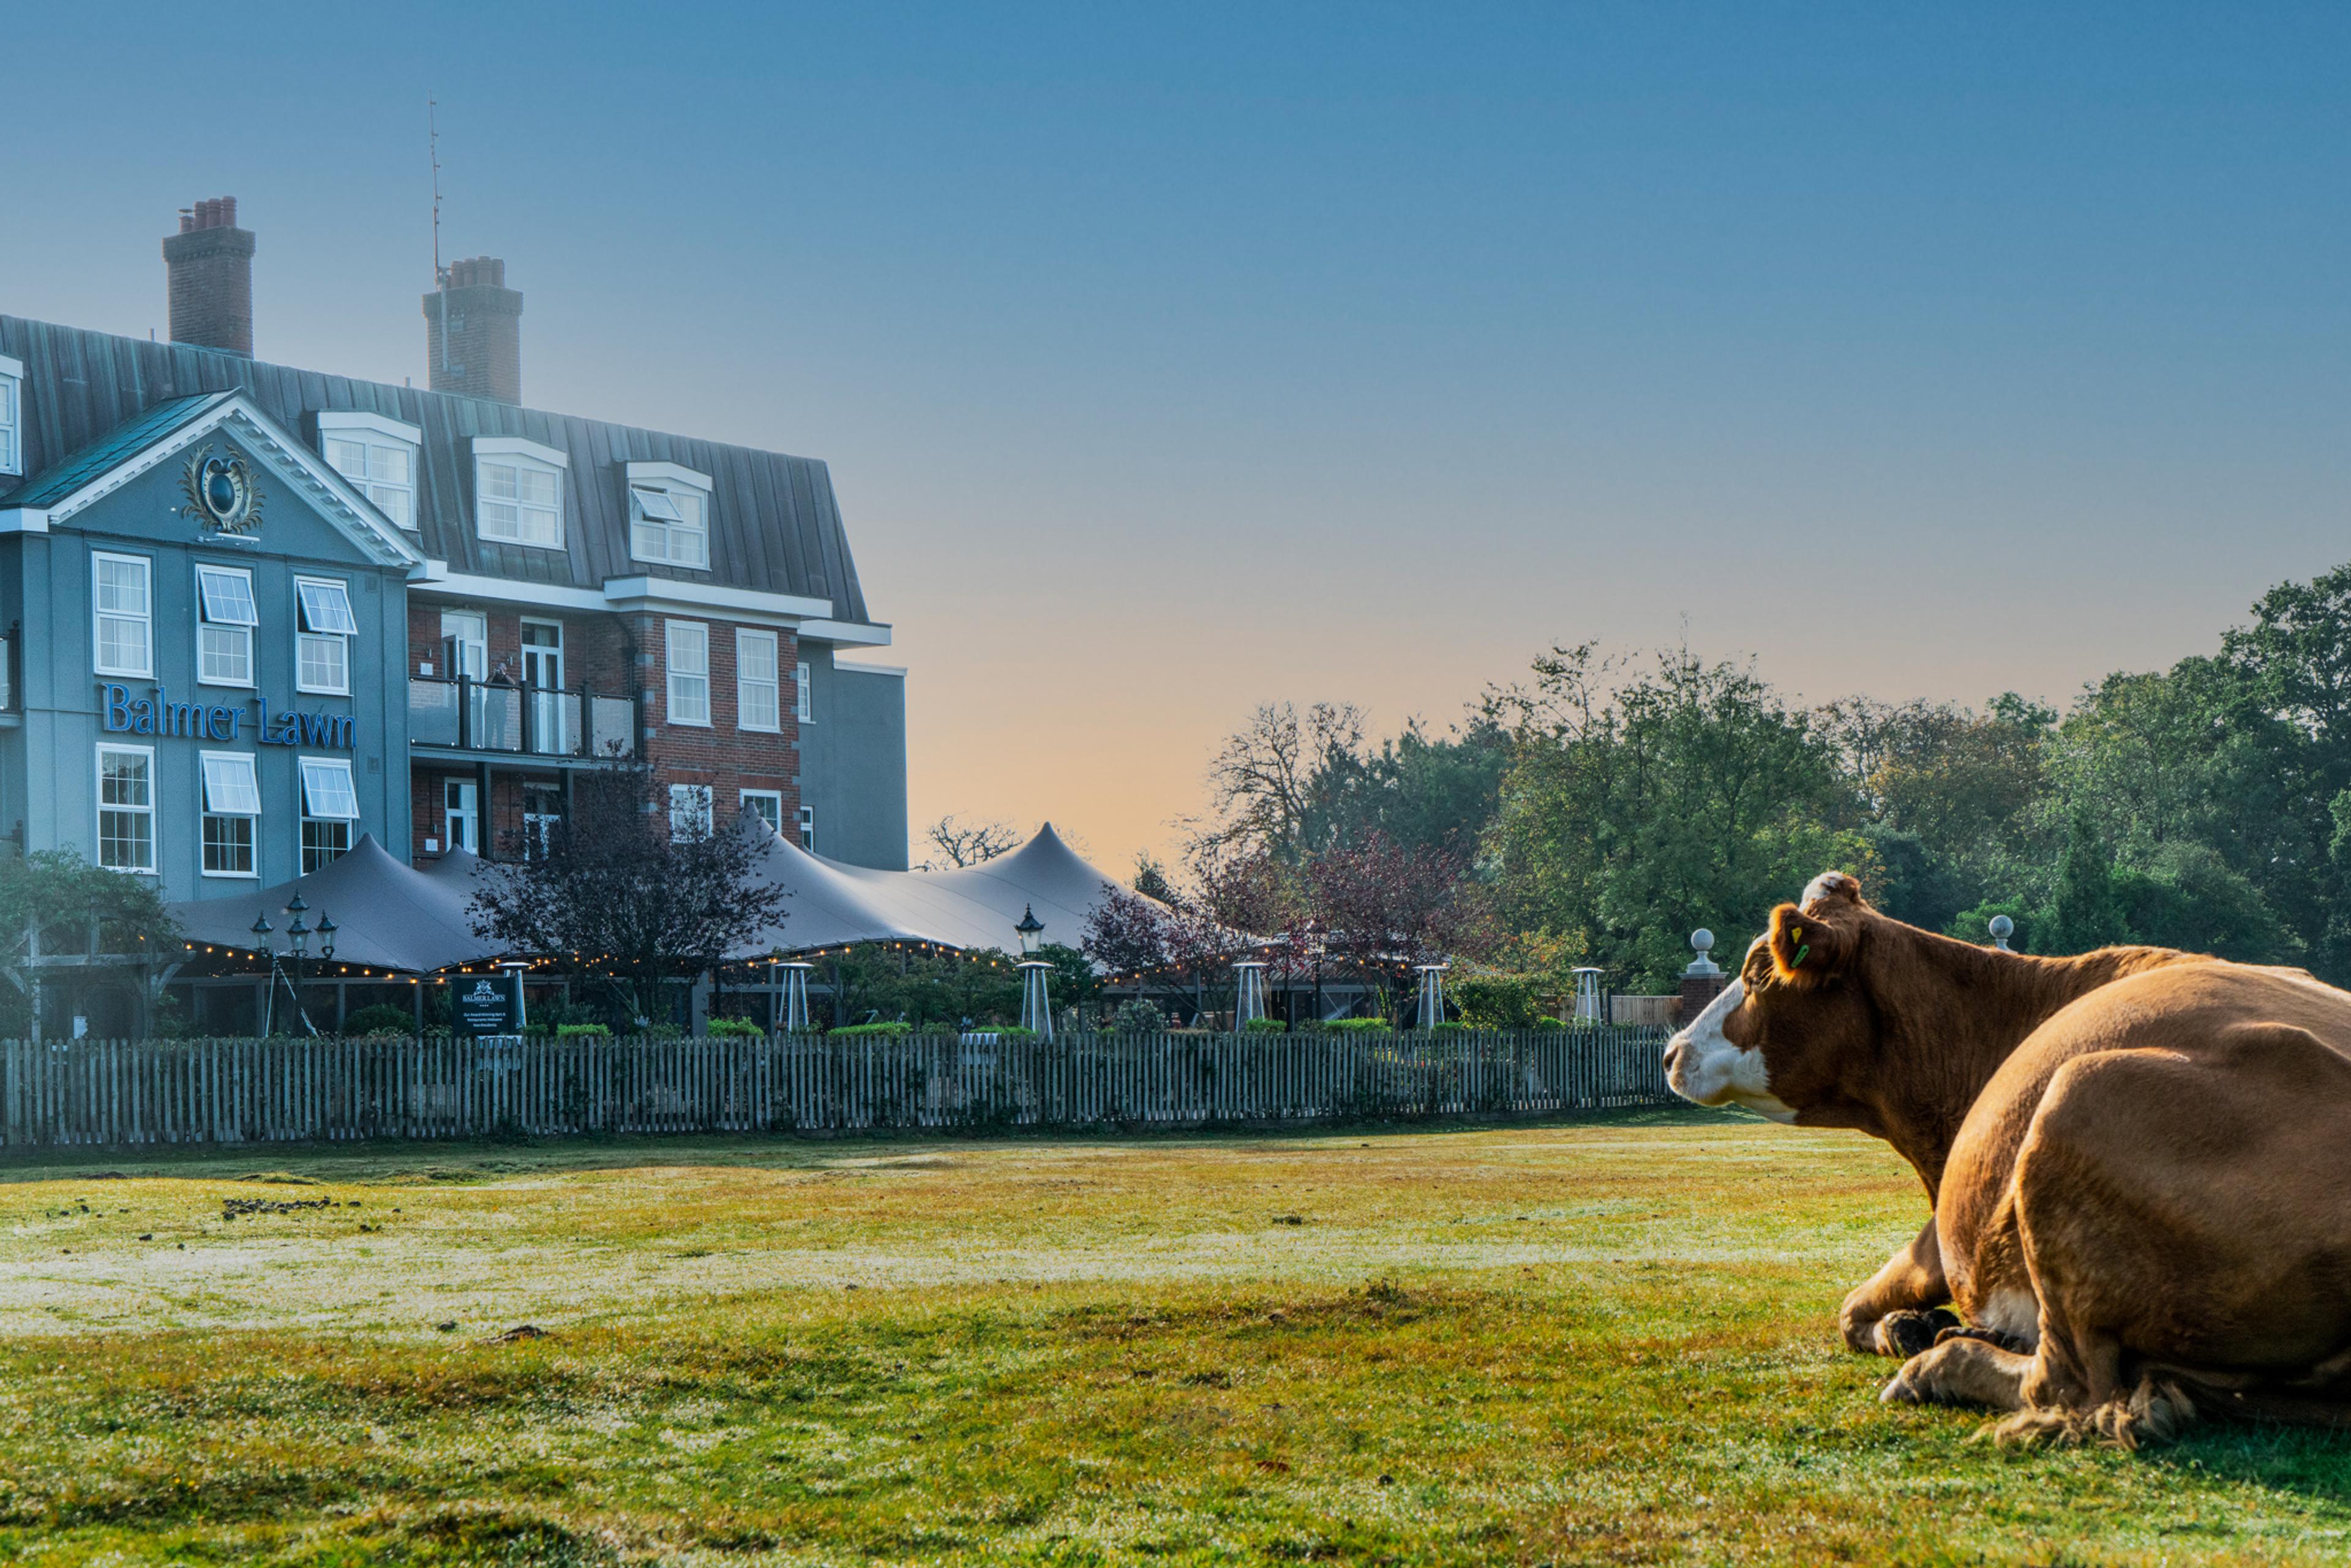 Balmer Lawn hotel in the New Forest, Hampshire